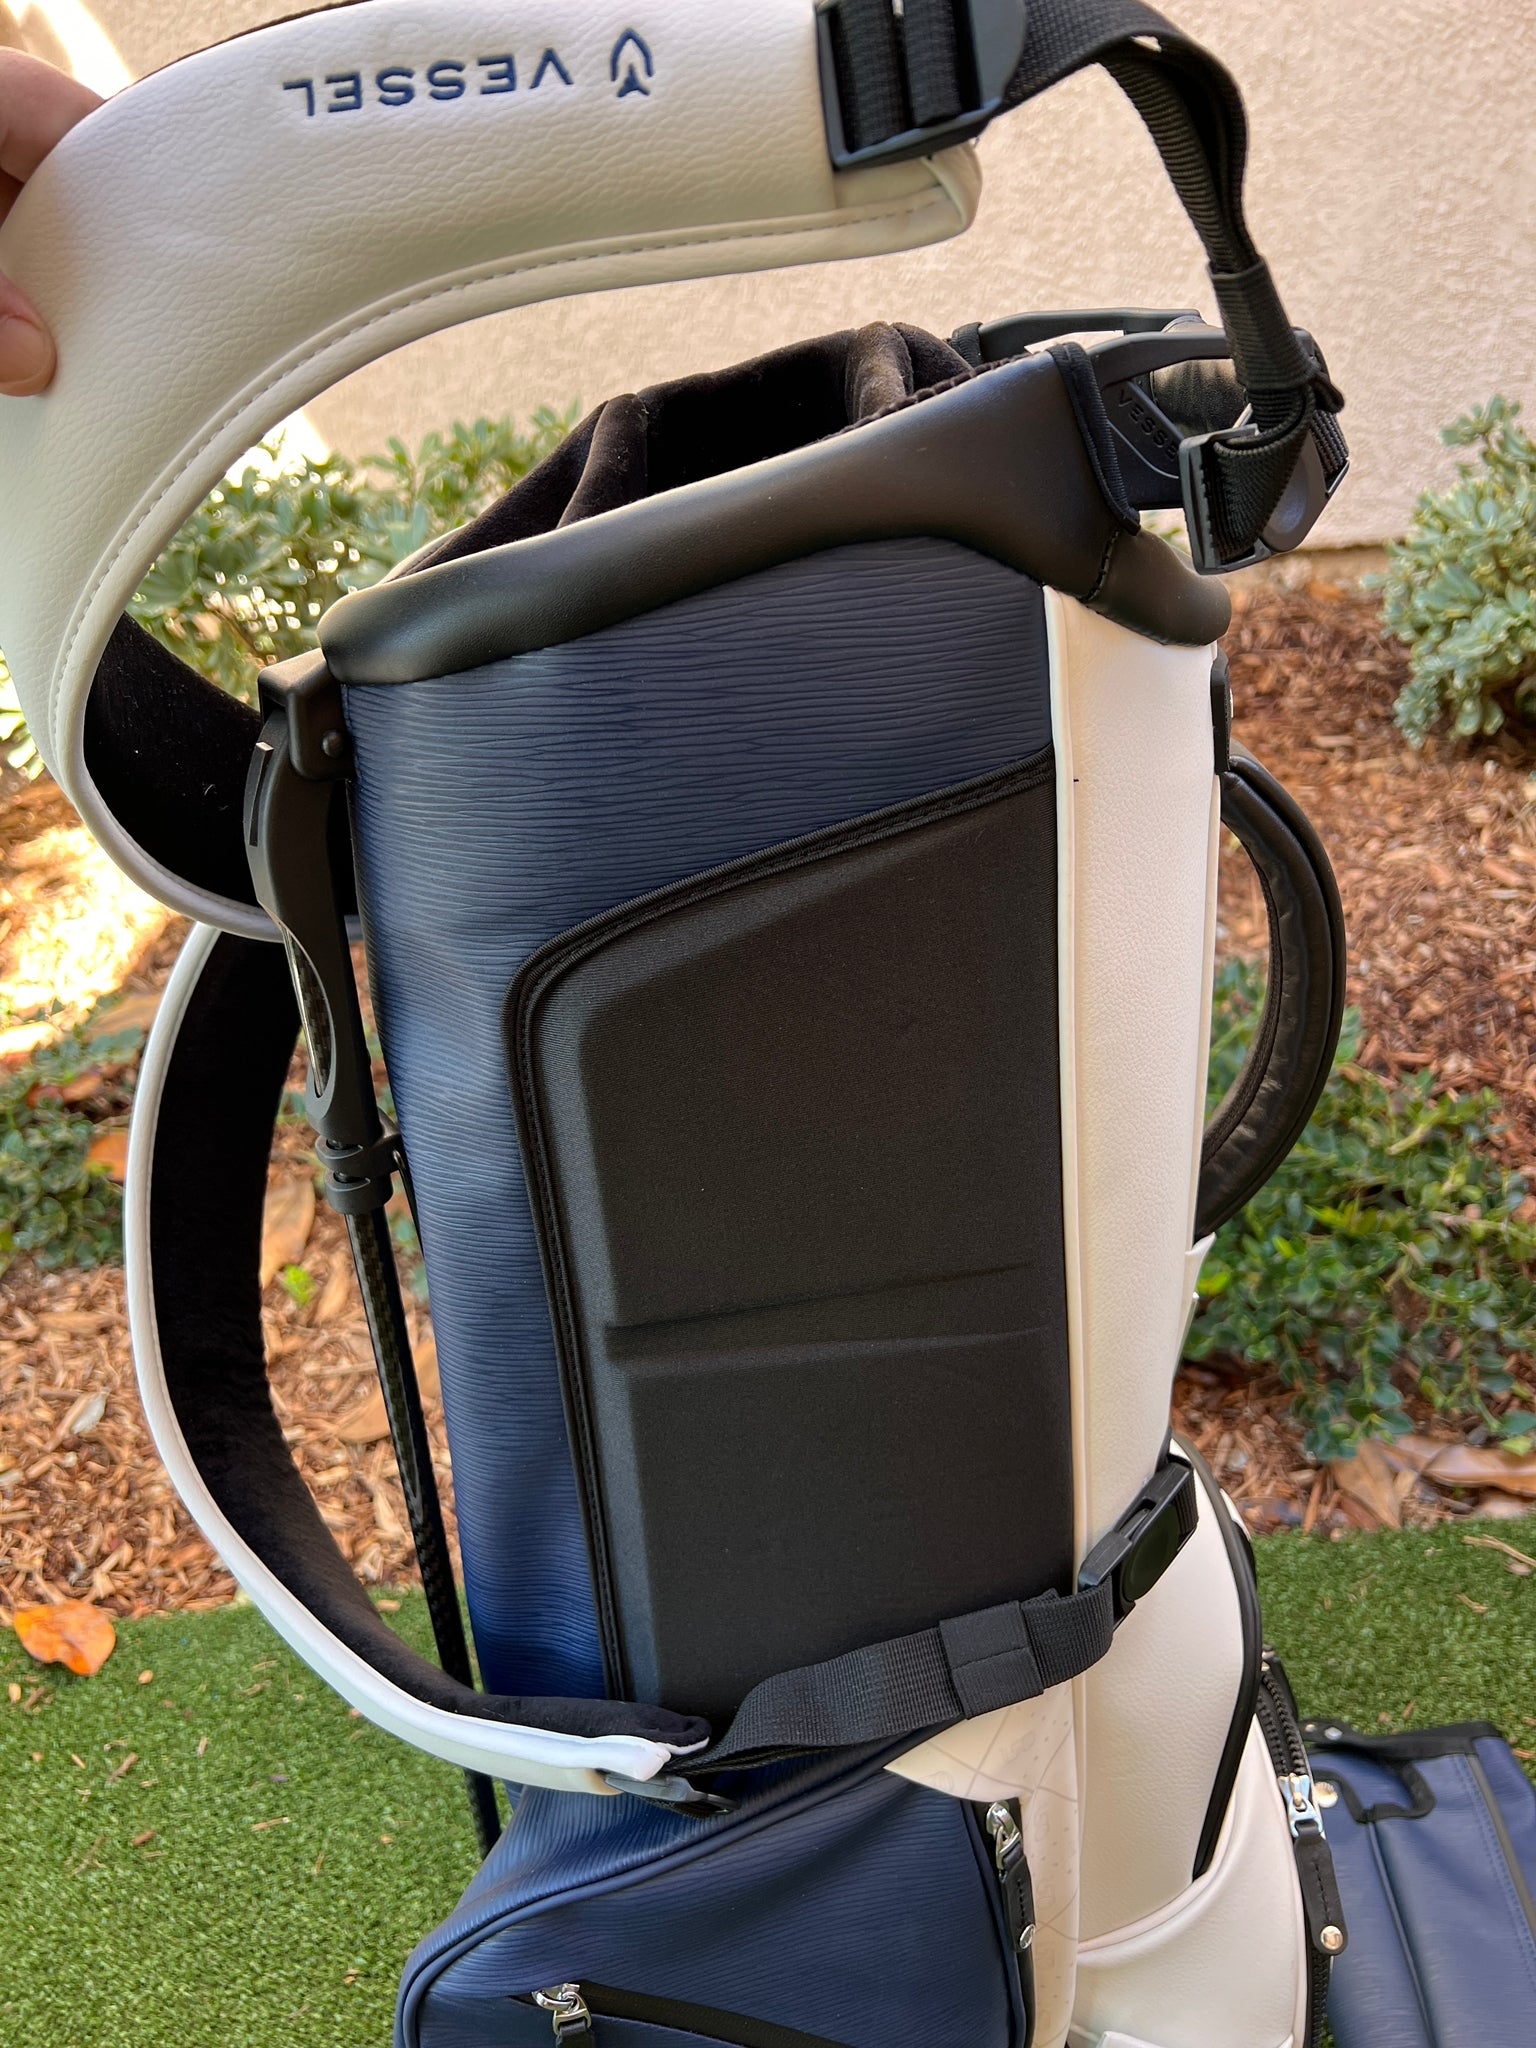 REVIEW: Vessel Players 2.0 Stand Bag